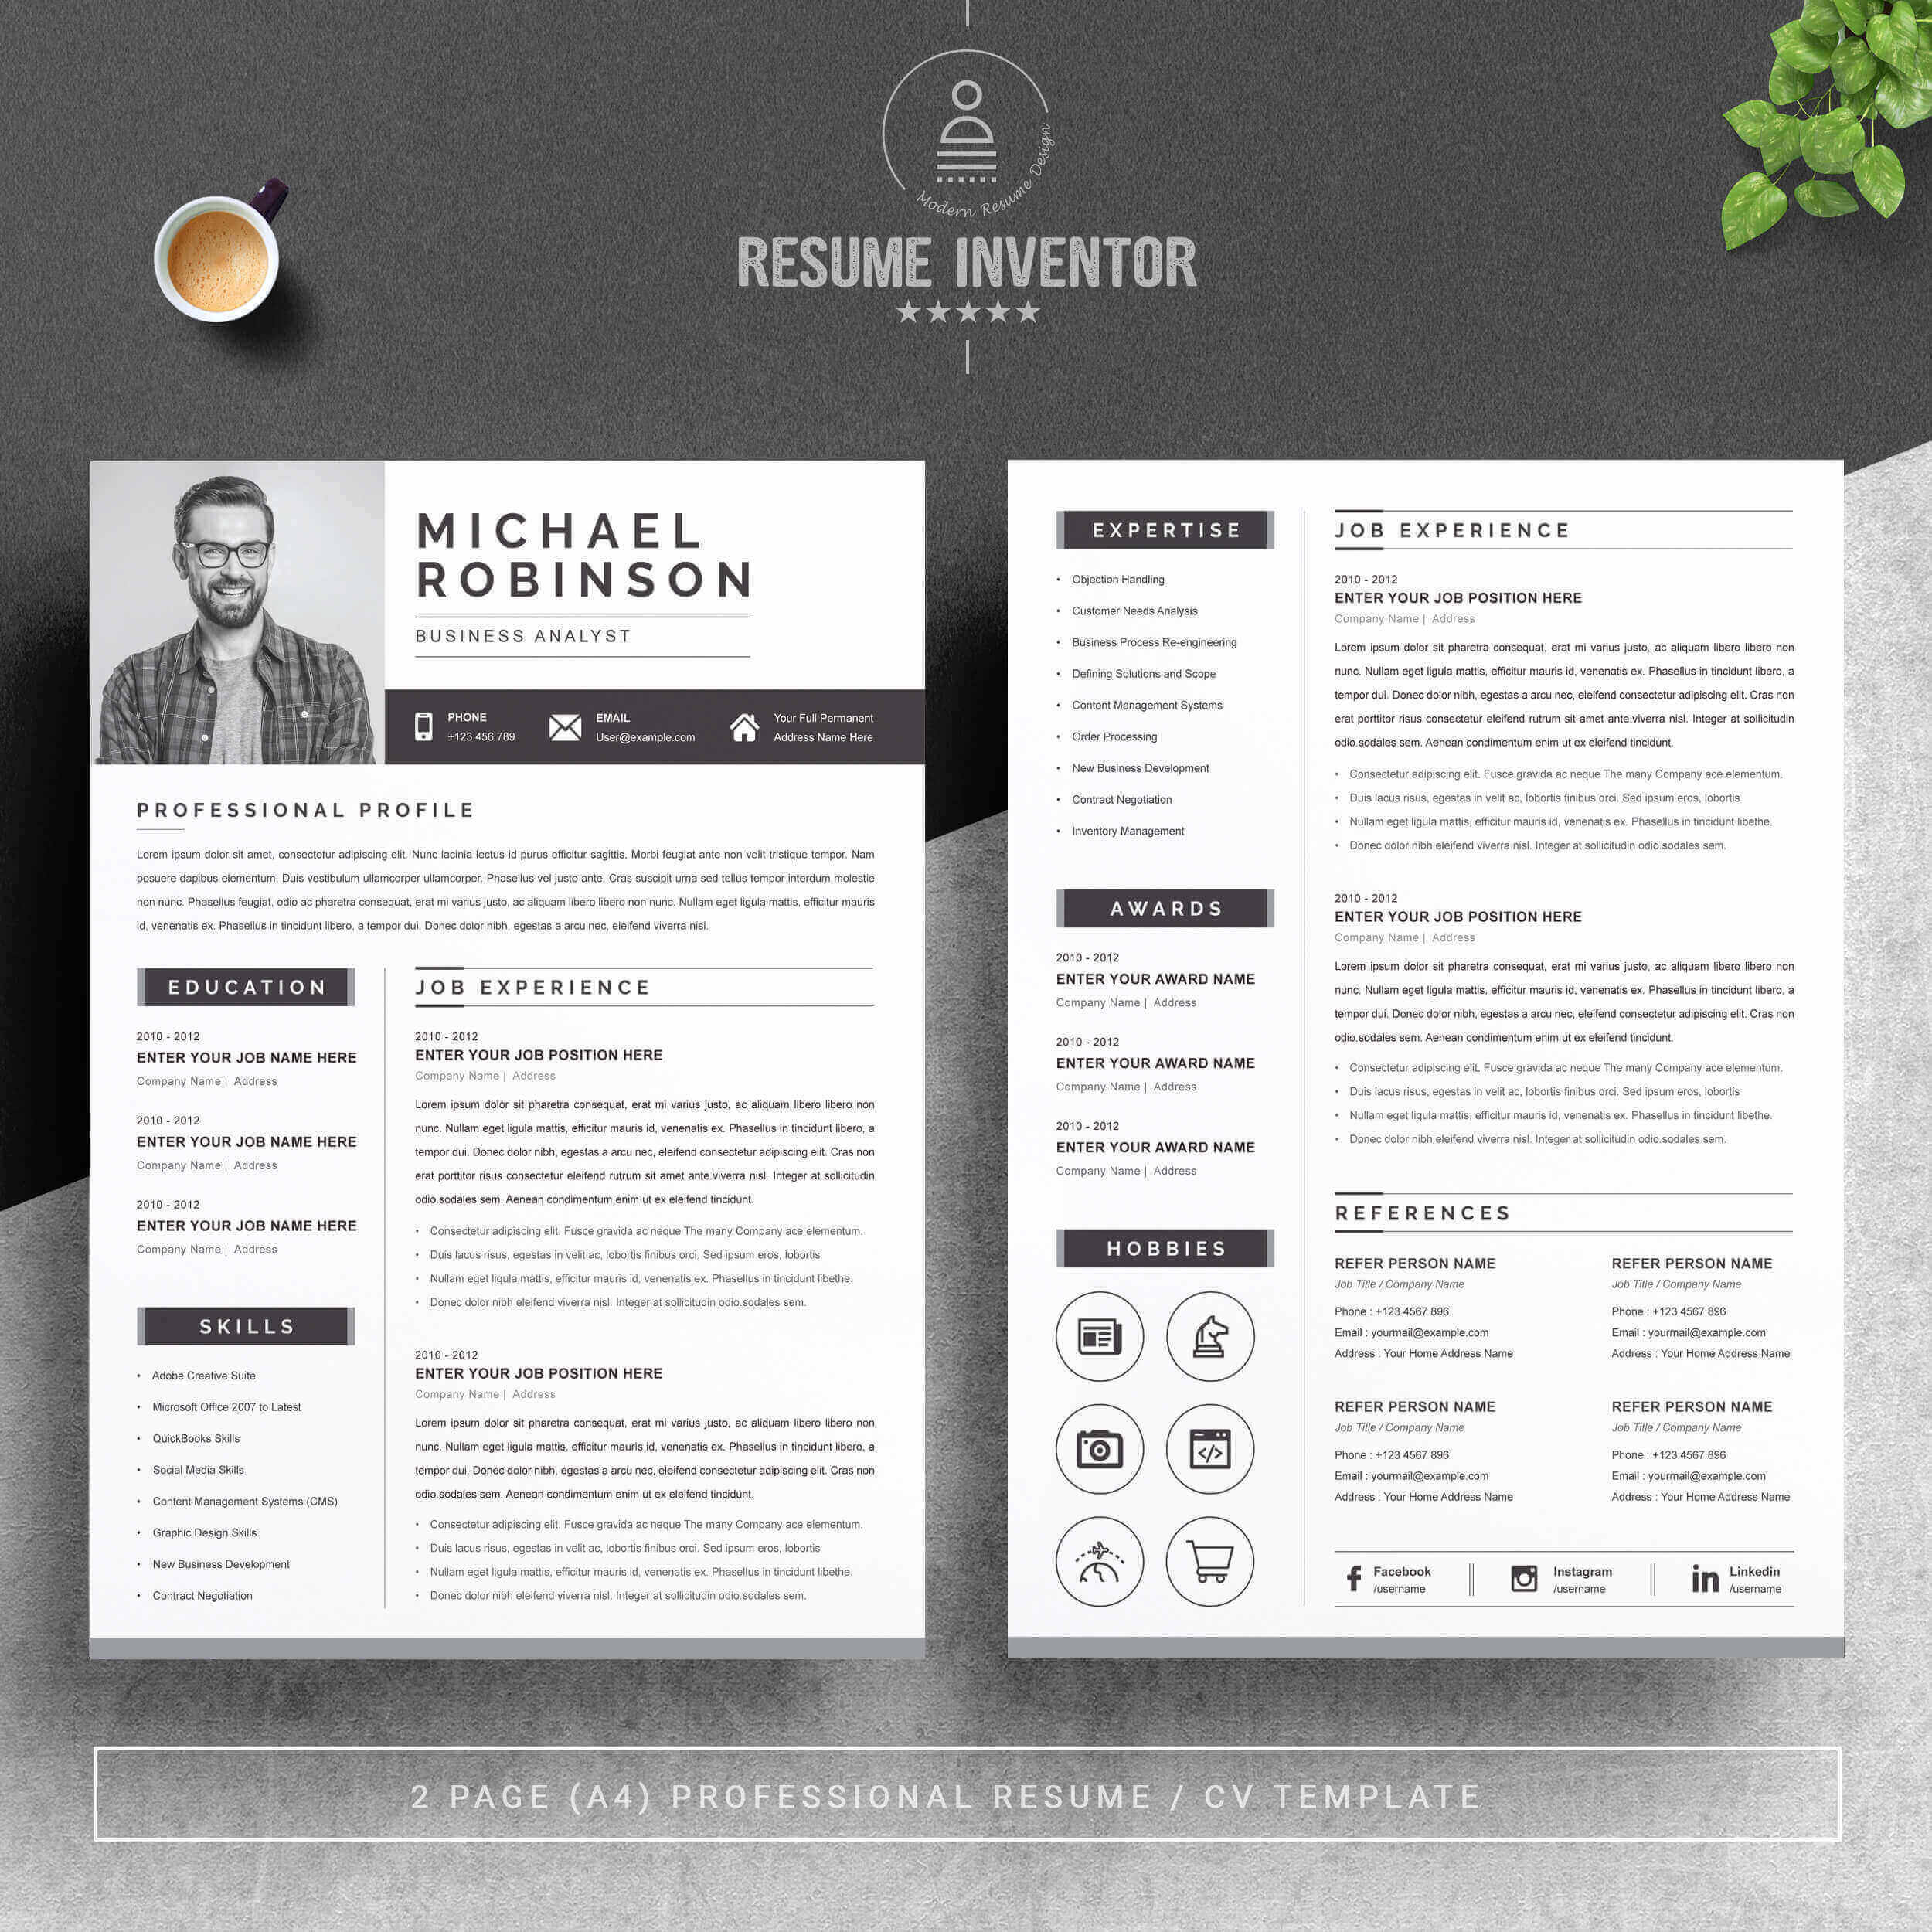 Professional Resume Template | Microsoft Word Resume Template preview image.